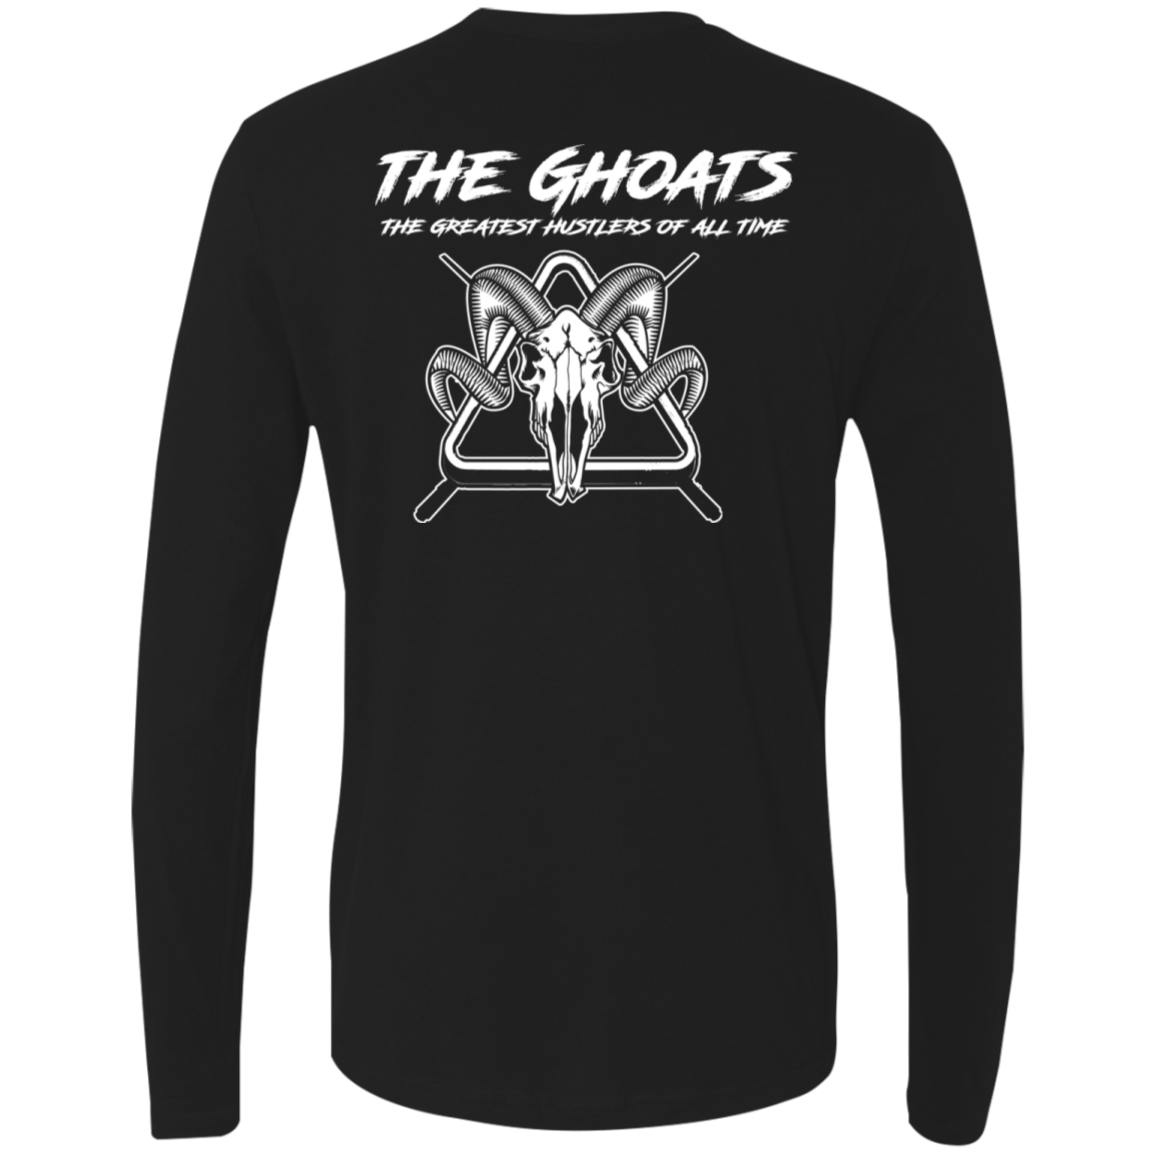 The GHOATS Custom Design #1. Active Shooter. Ultra Soft Fitted Men's Long Sleeve